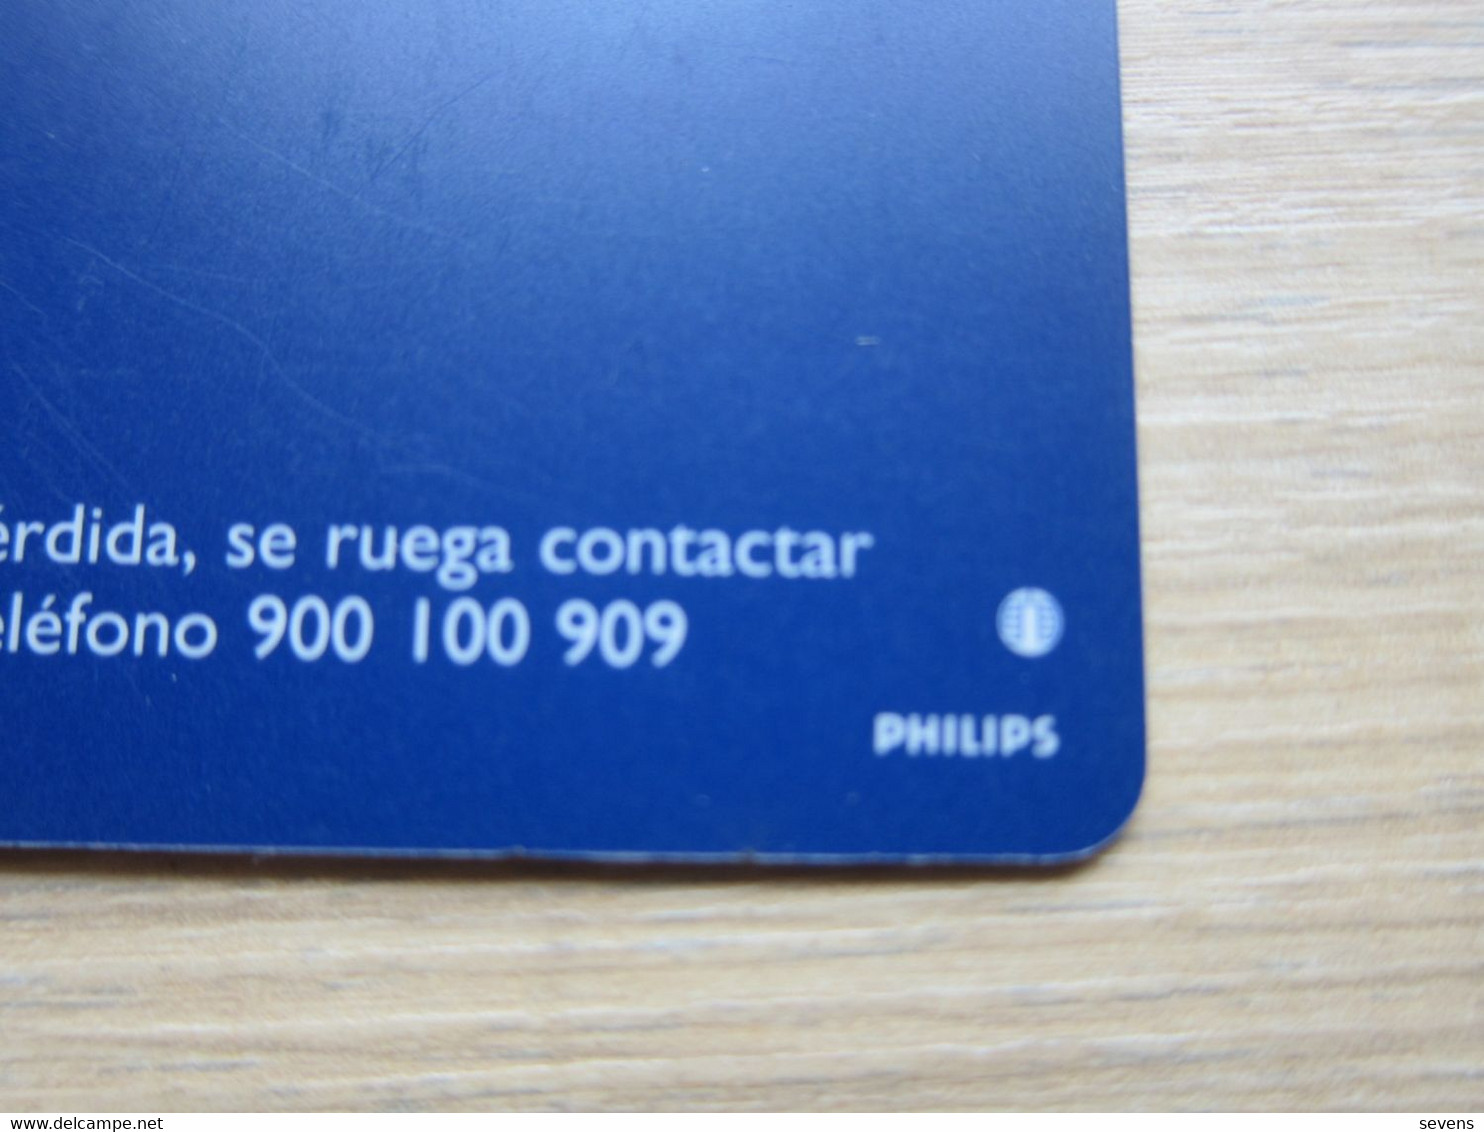 MoviStar Map Of West Europe,fixed Chip,backside With Philips And Moreno Double Logo - Telefonica